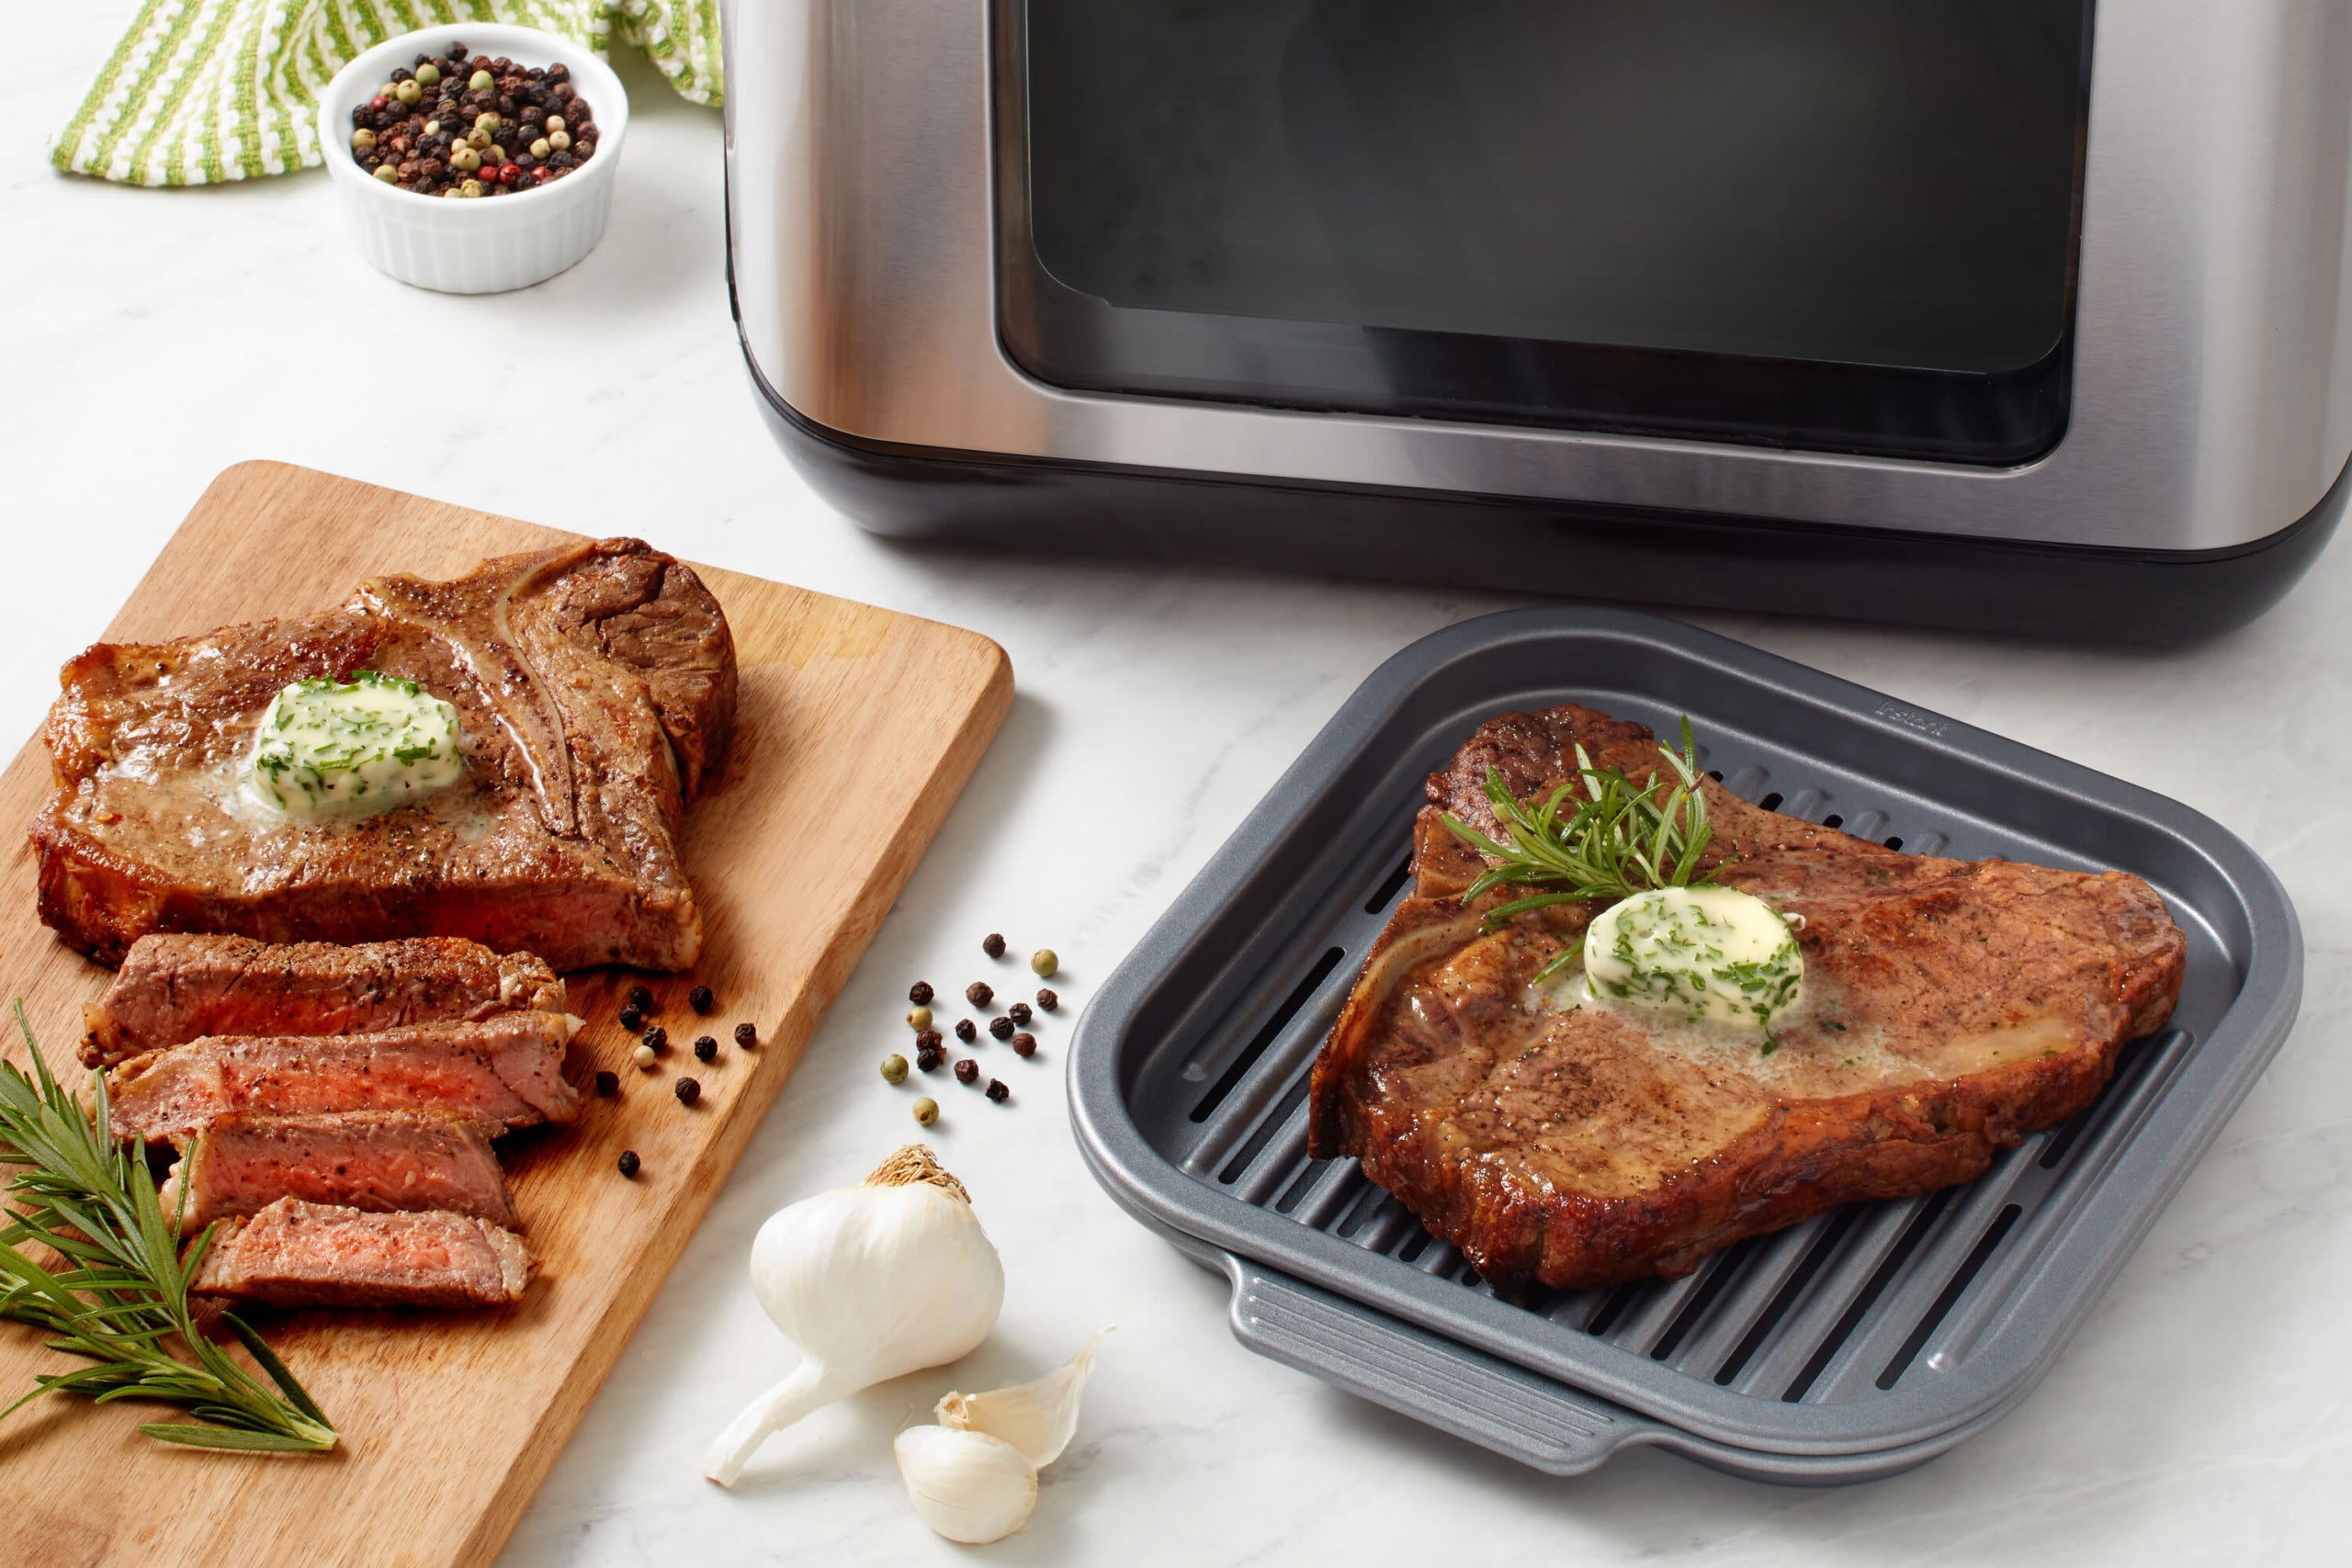 Air fryer accessories to make using your favourite gadget even easier